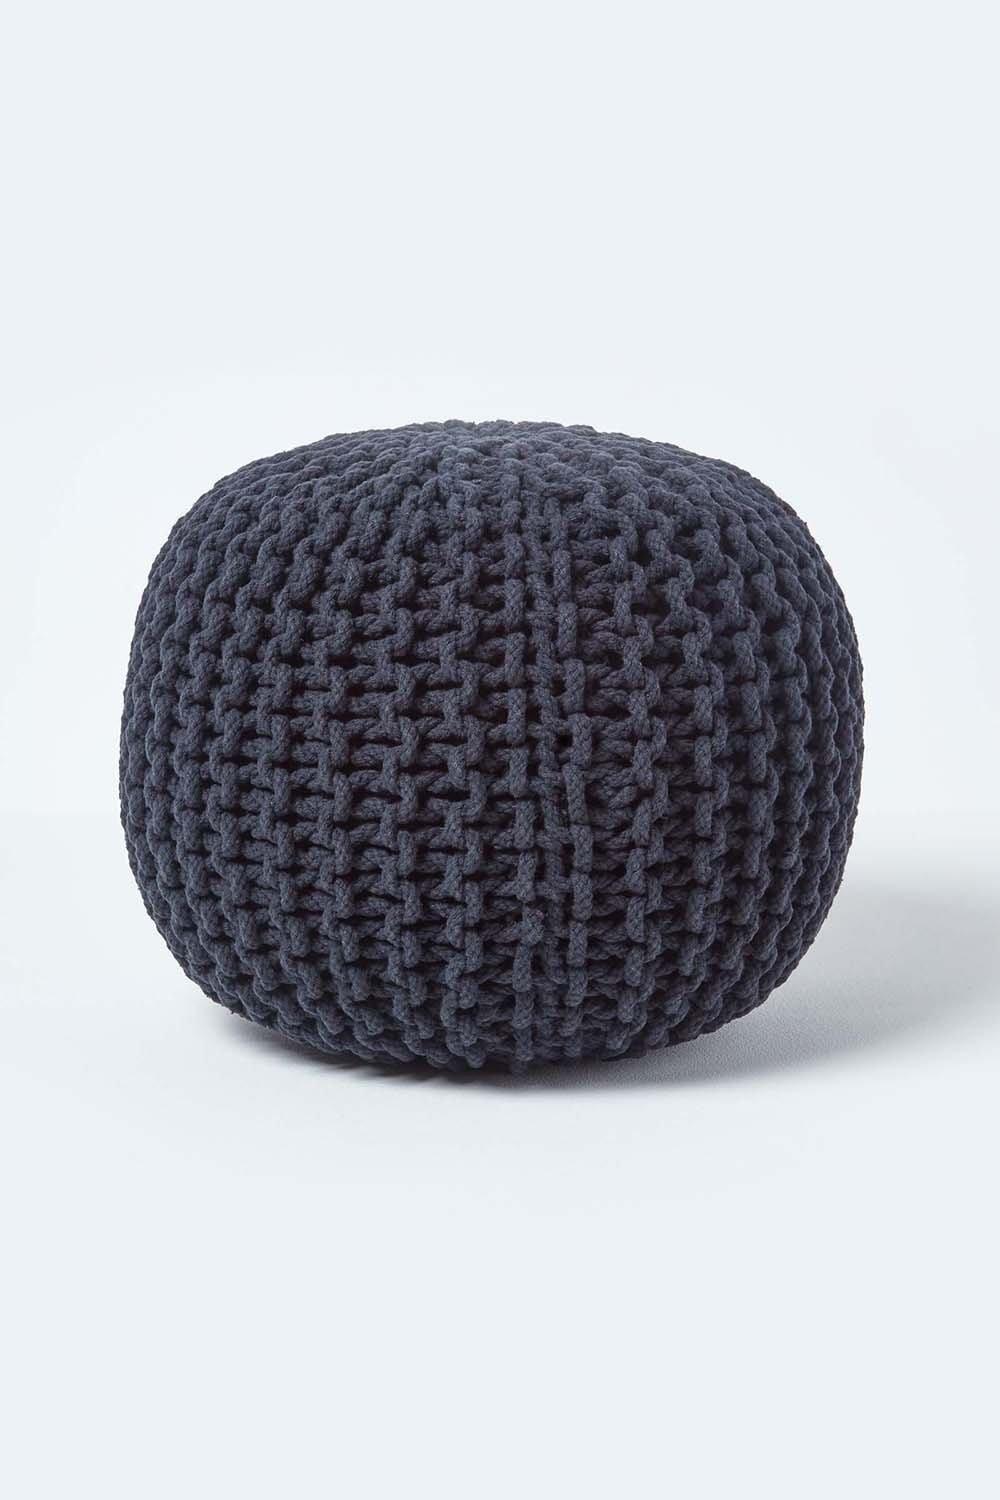 Homescapes Round Cotton Knitted Pouffe Footstool|black